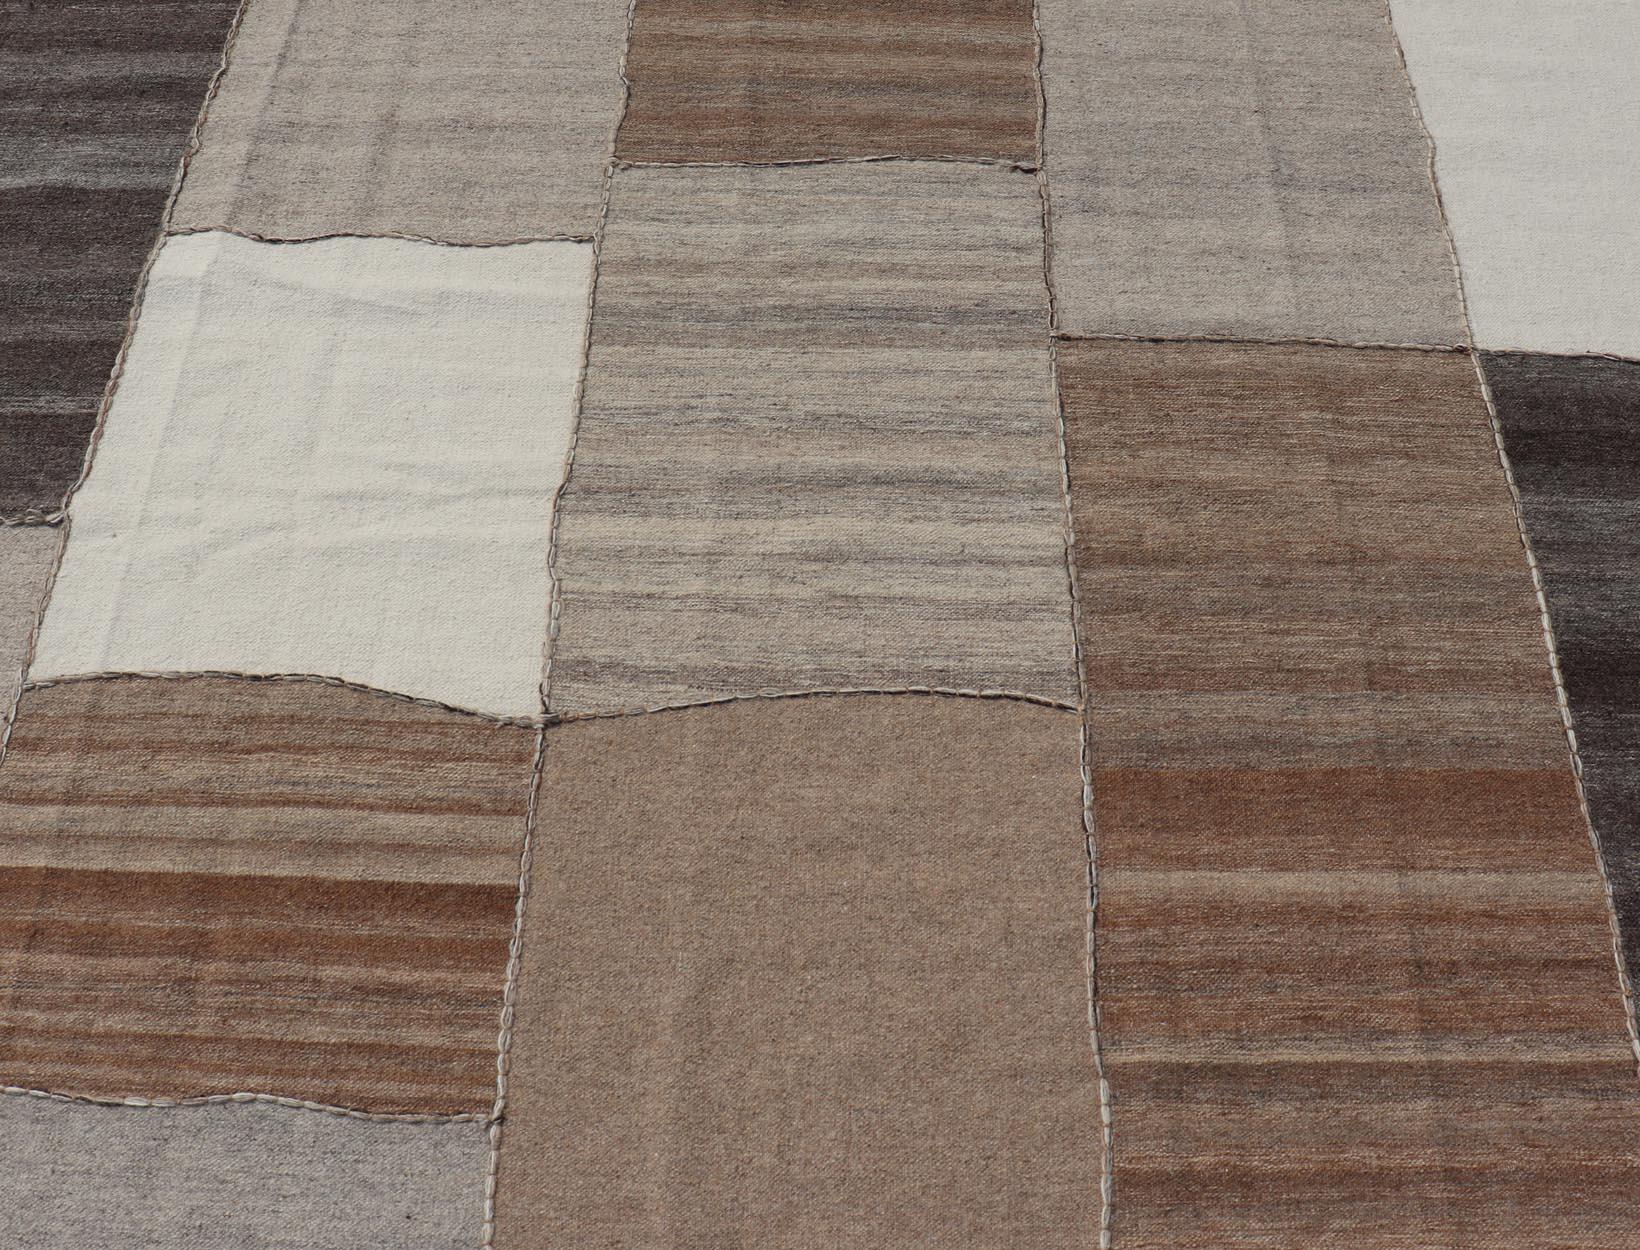 Hand-Woven Modern Kilim Rug in Multi-Panel Striped Design with Brown, Gray, White and Taupe For Sale